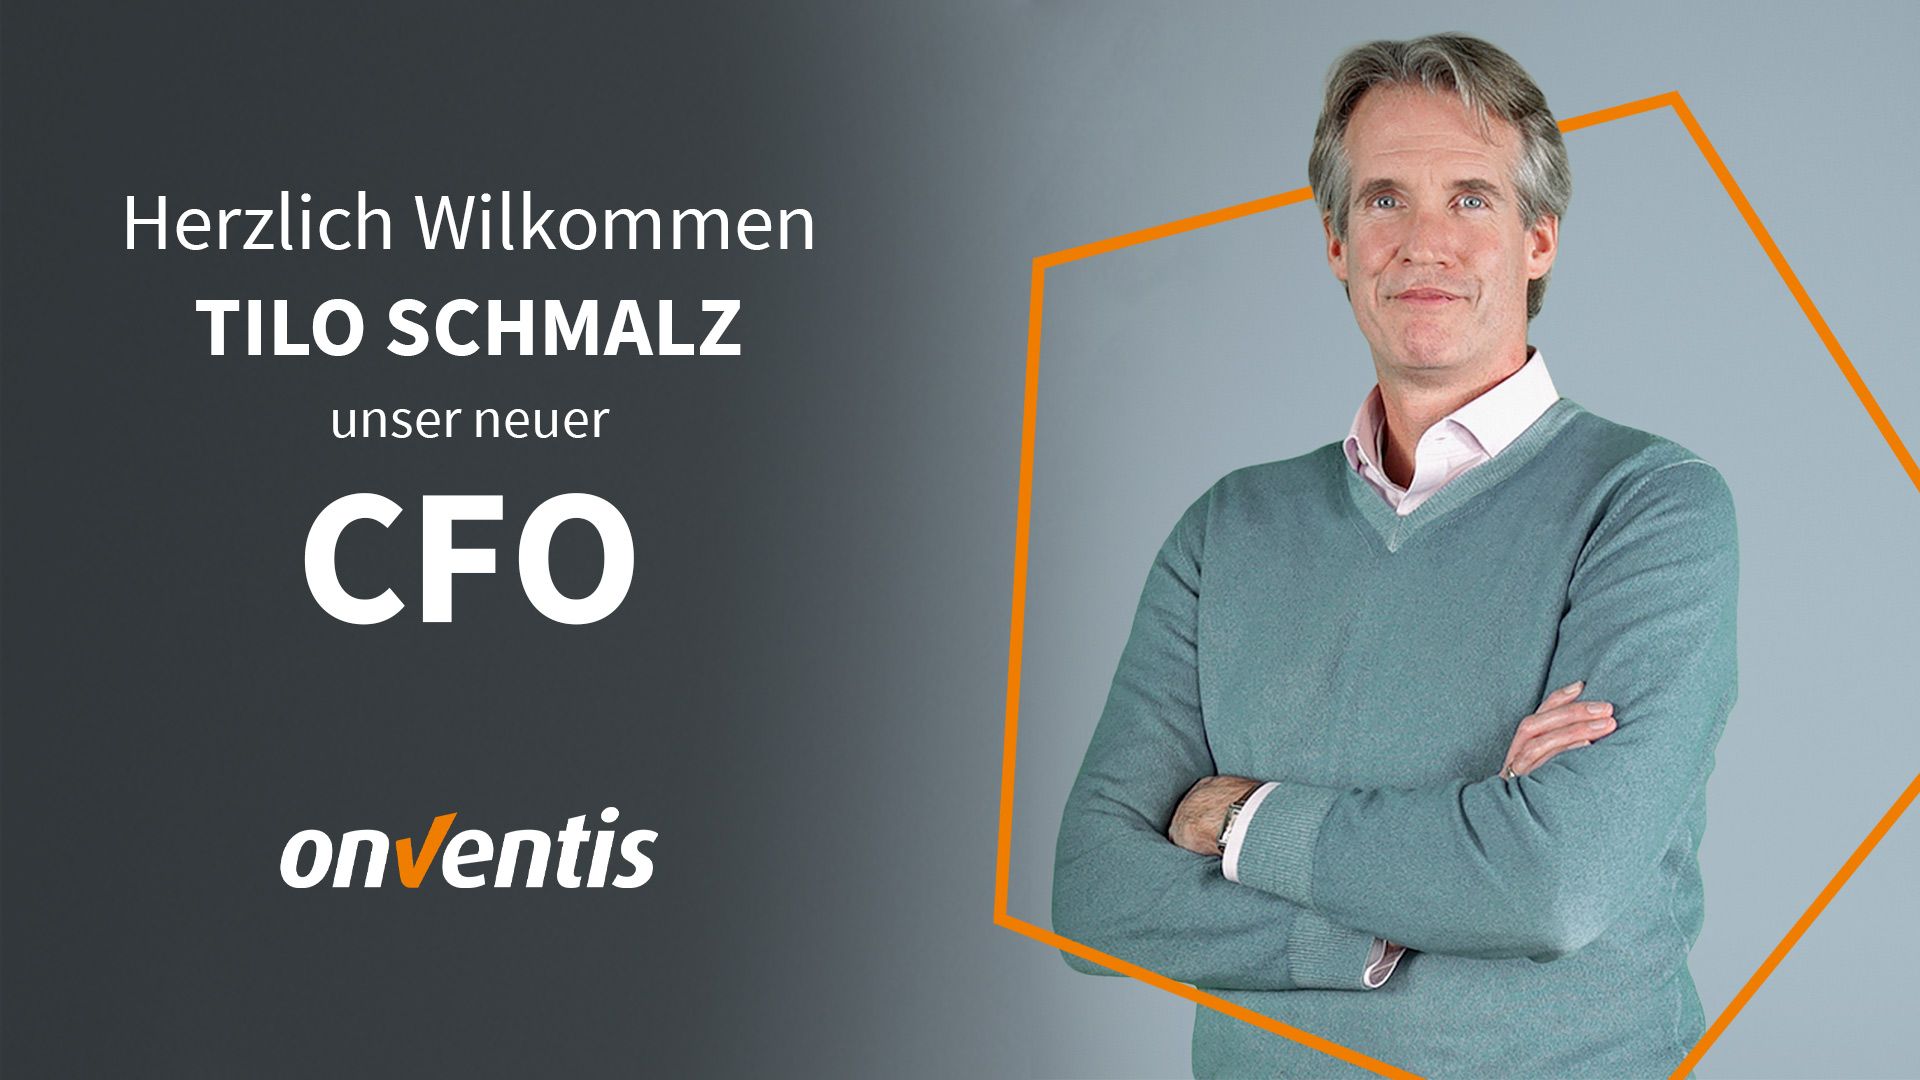 Tilo Schmalz is New Chief Financial Officer of Onventis